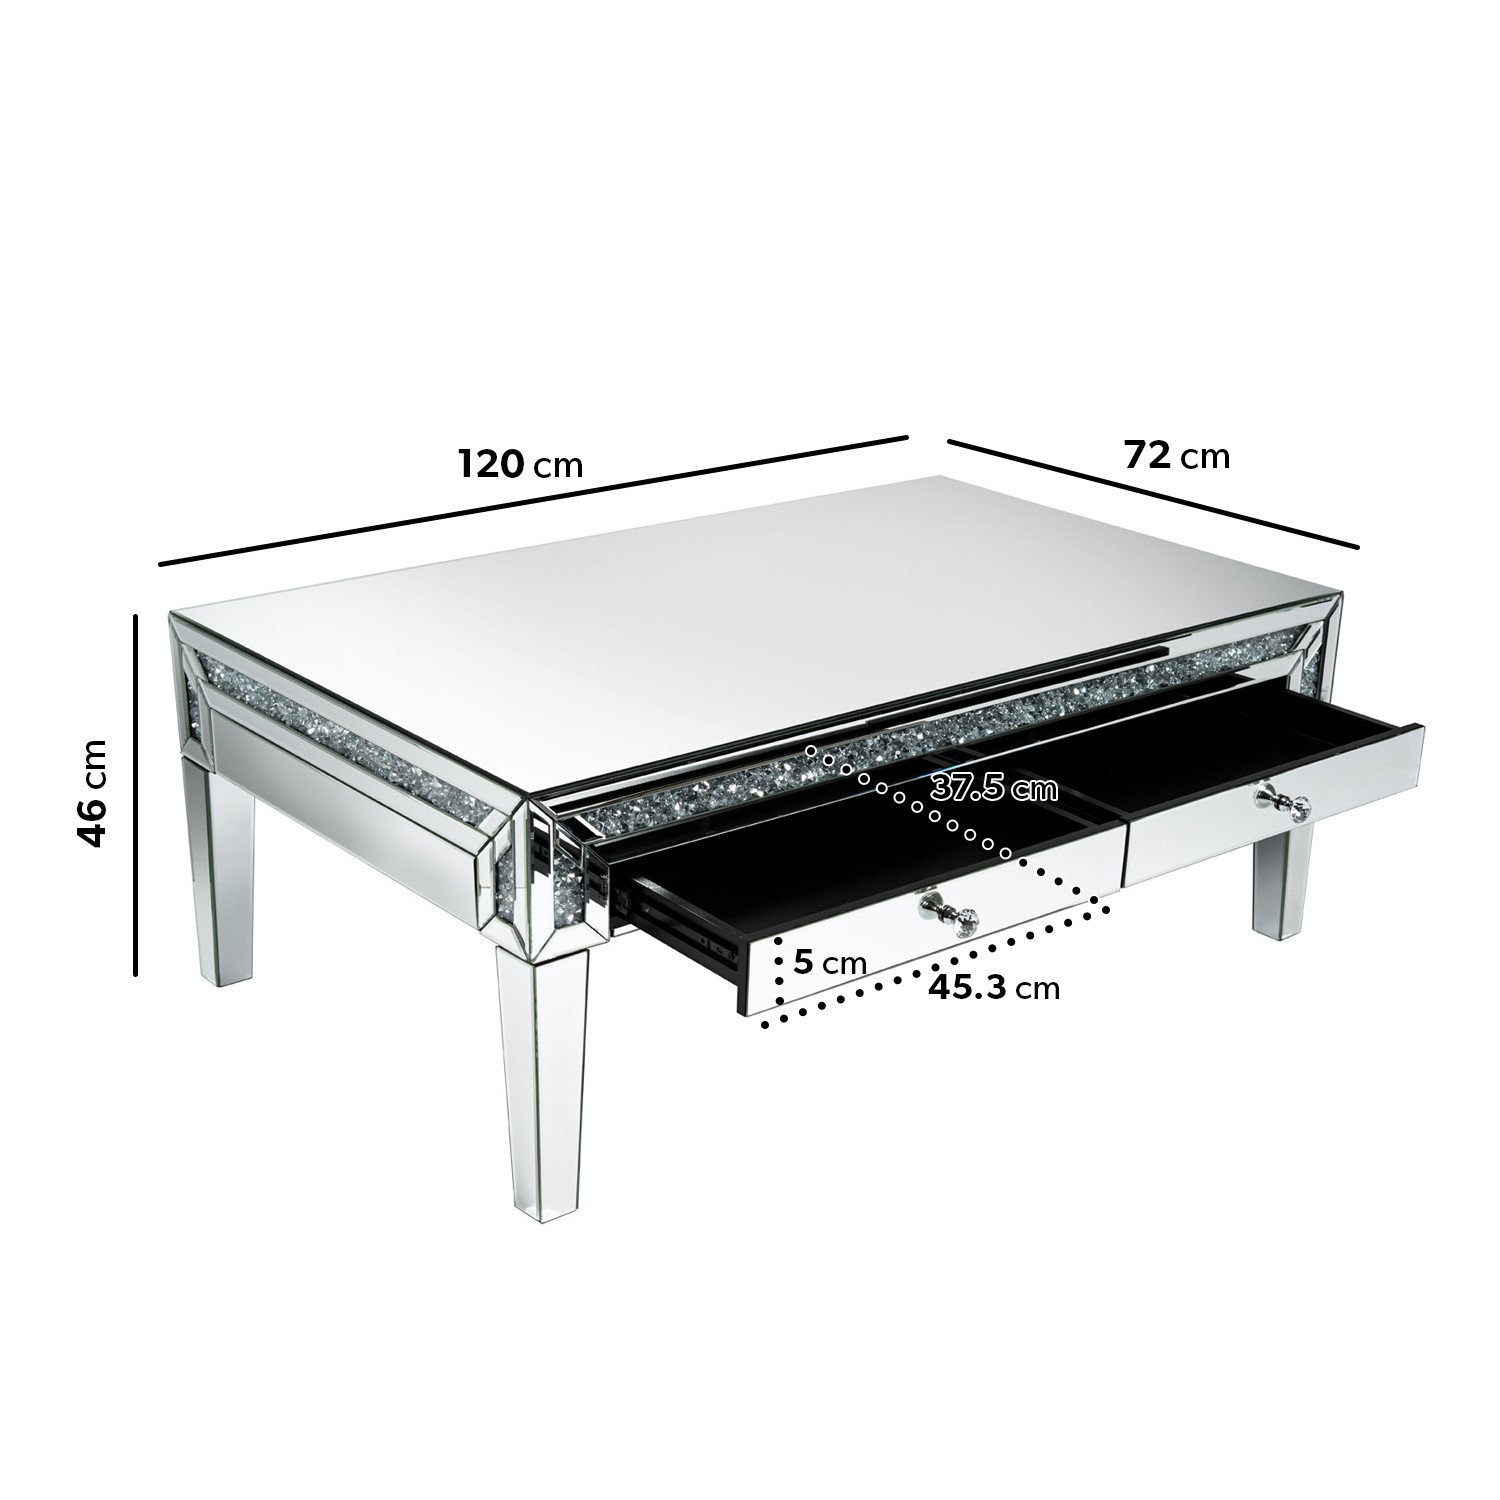 Mirrored Coffee Table With Drawers, Mirrored Furniture Coffee Table